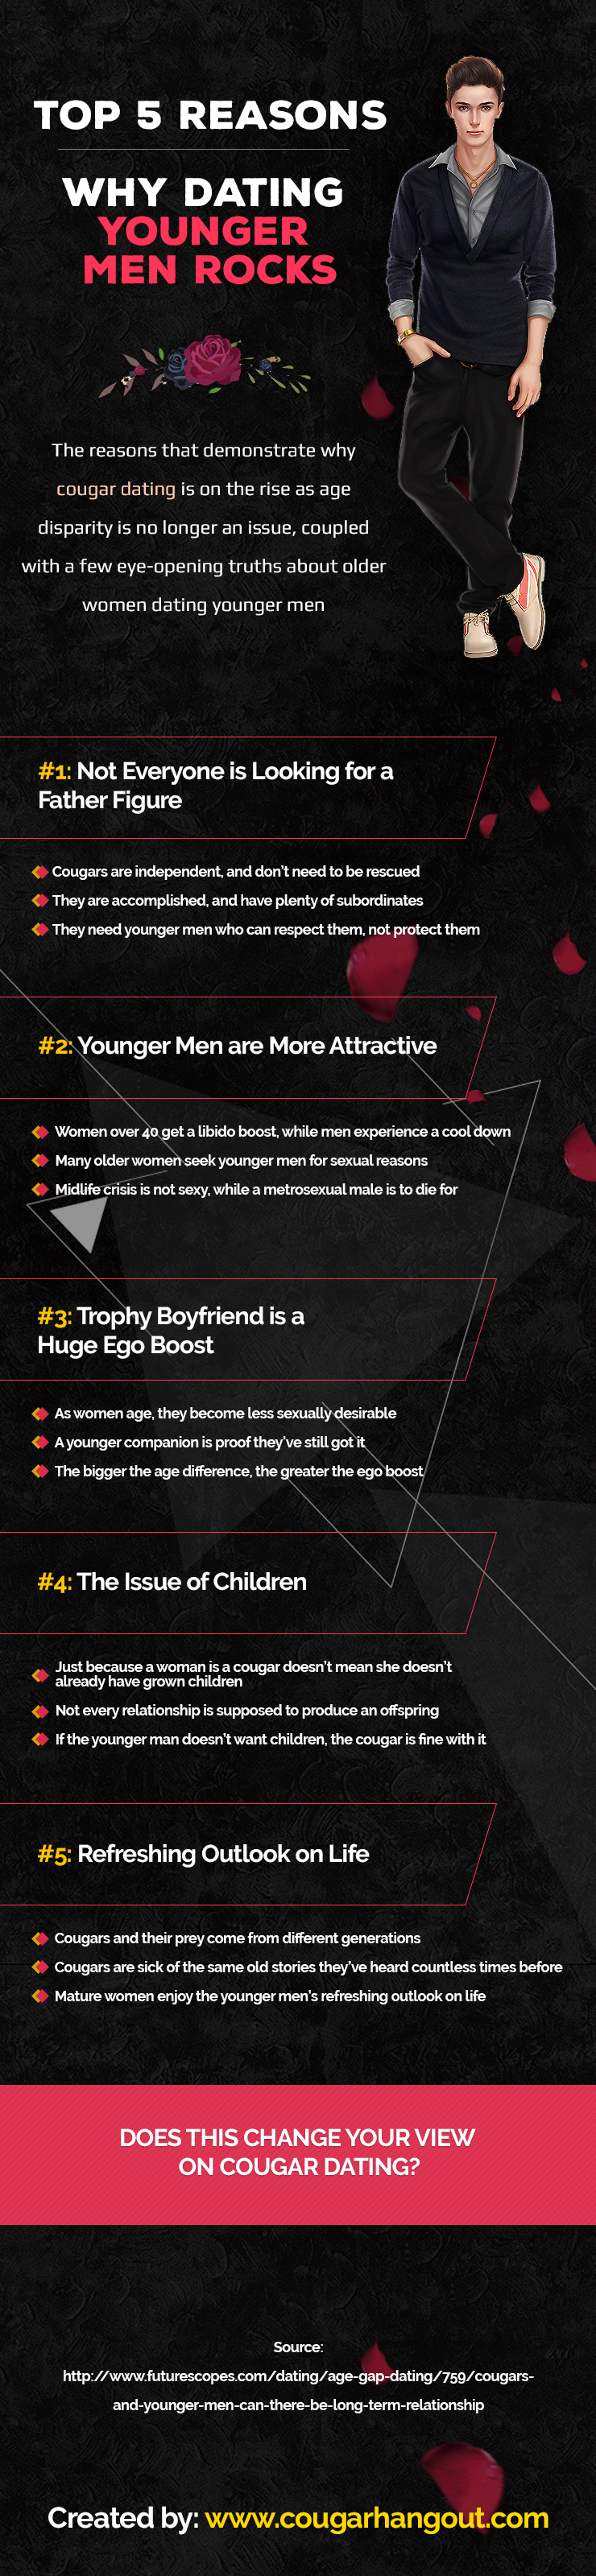 Top 5 Reasons Why Dating Younger Men Rocks